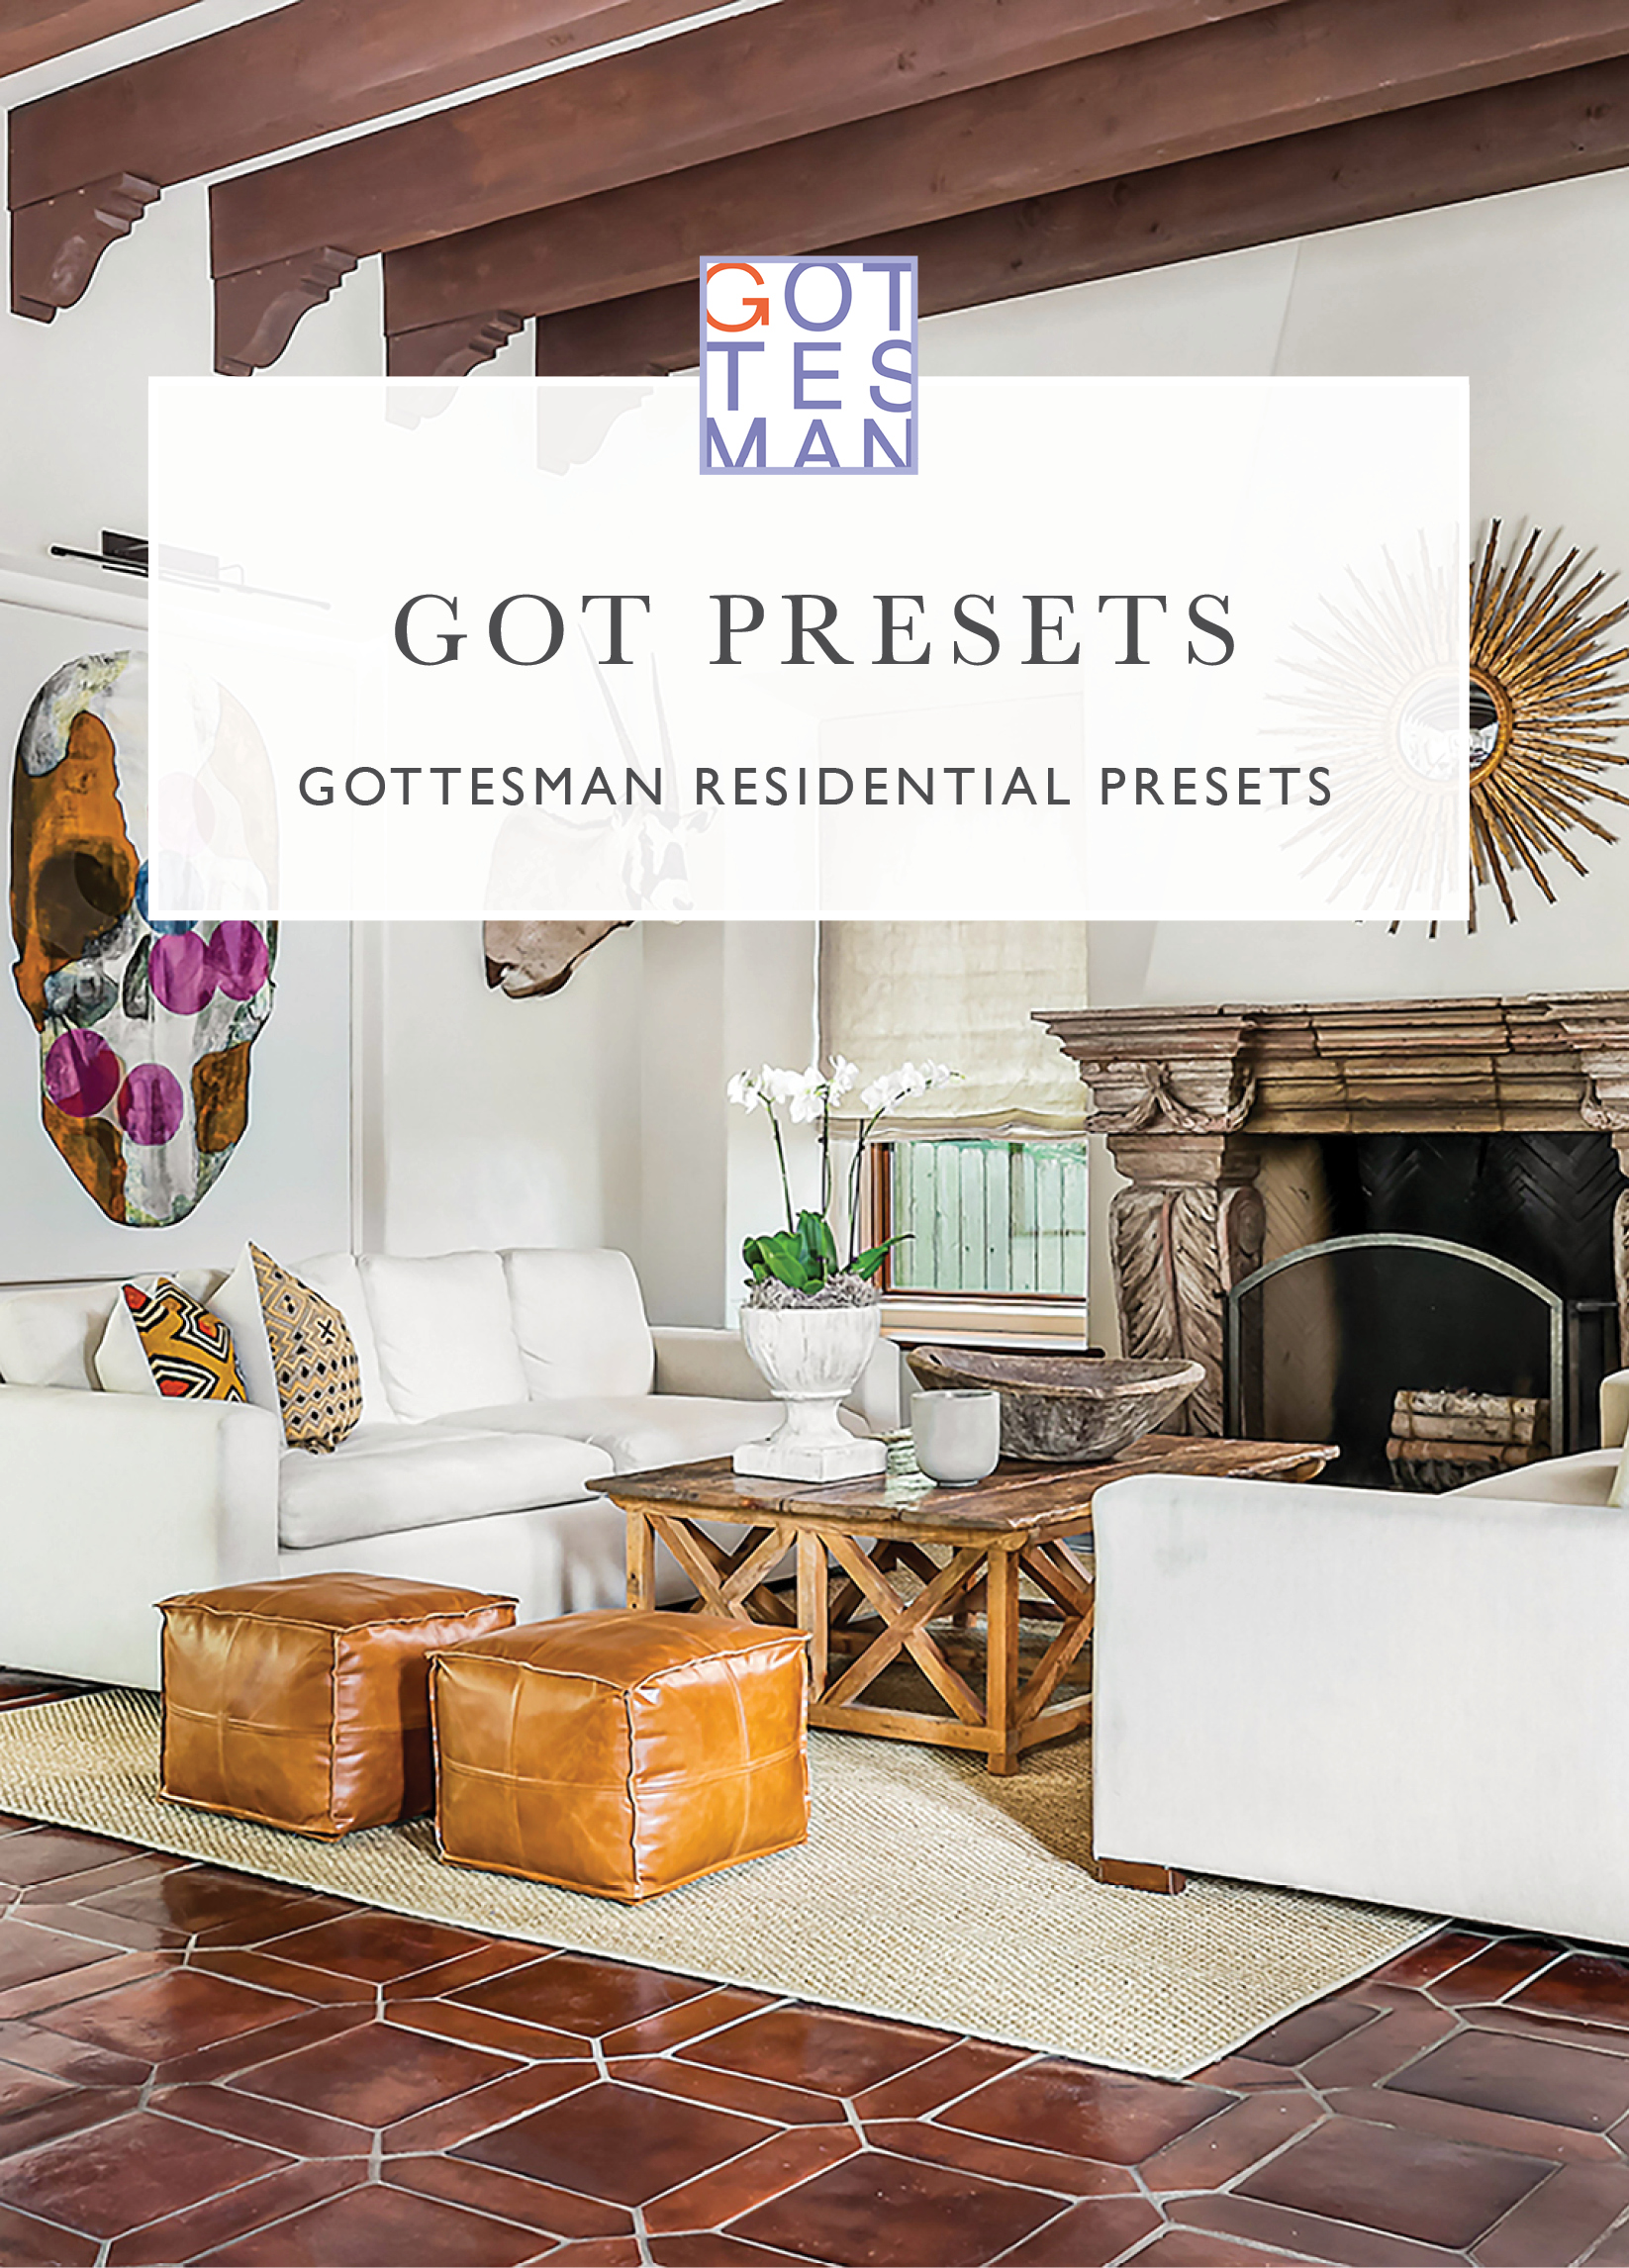 Living room with text overlay, "Got Presets: Gottesman Residential Presets"